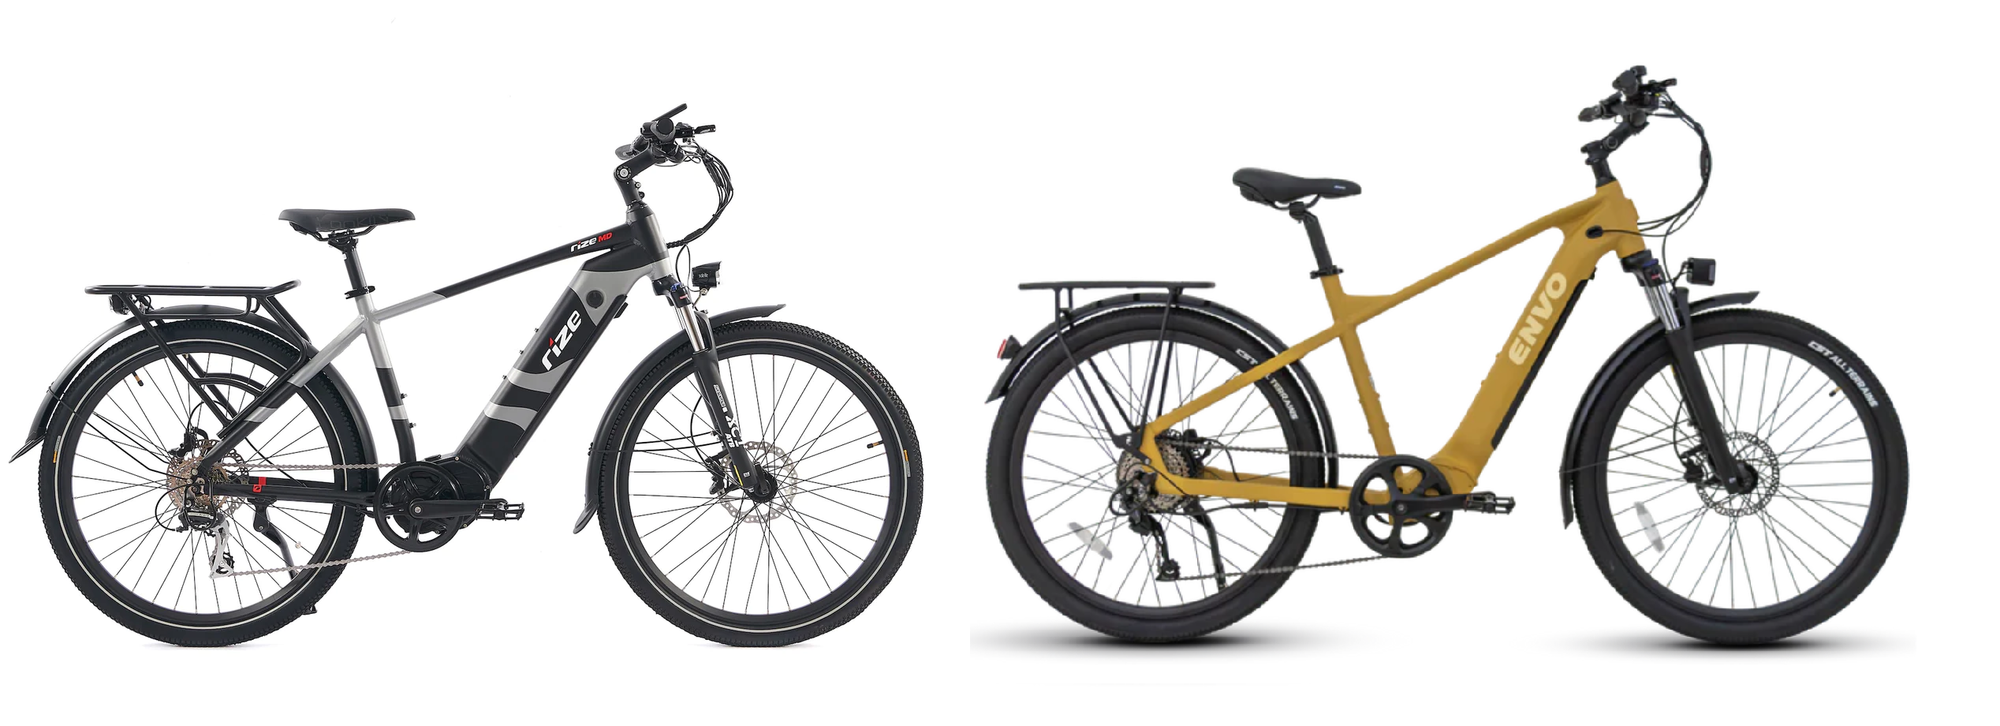 Rize MD vs. ENVO D50: A Detailed Comparison for Urban and Adventure Cyclists